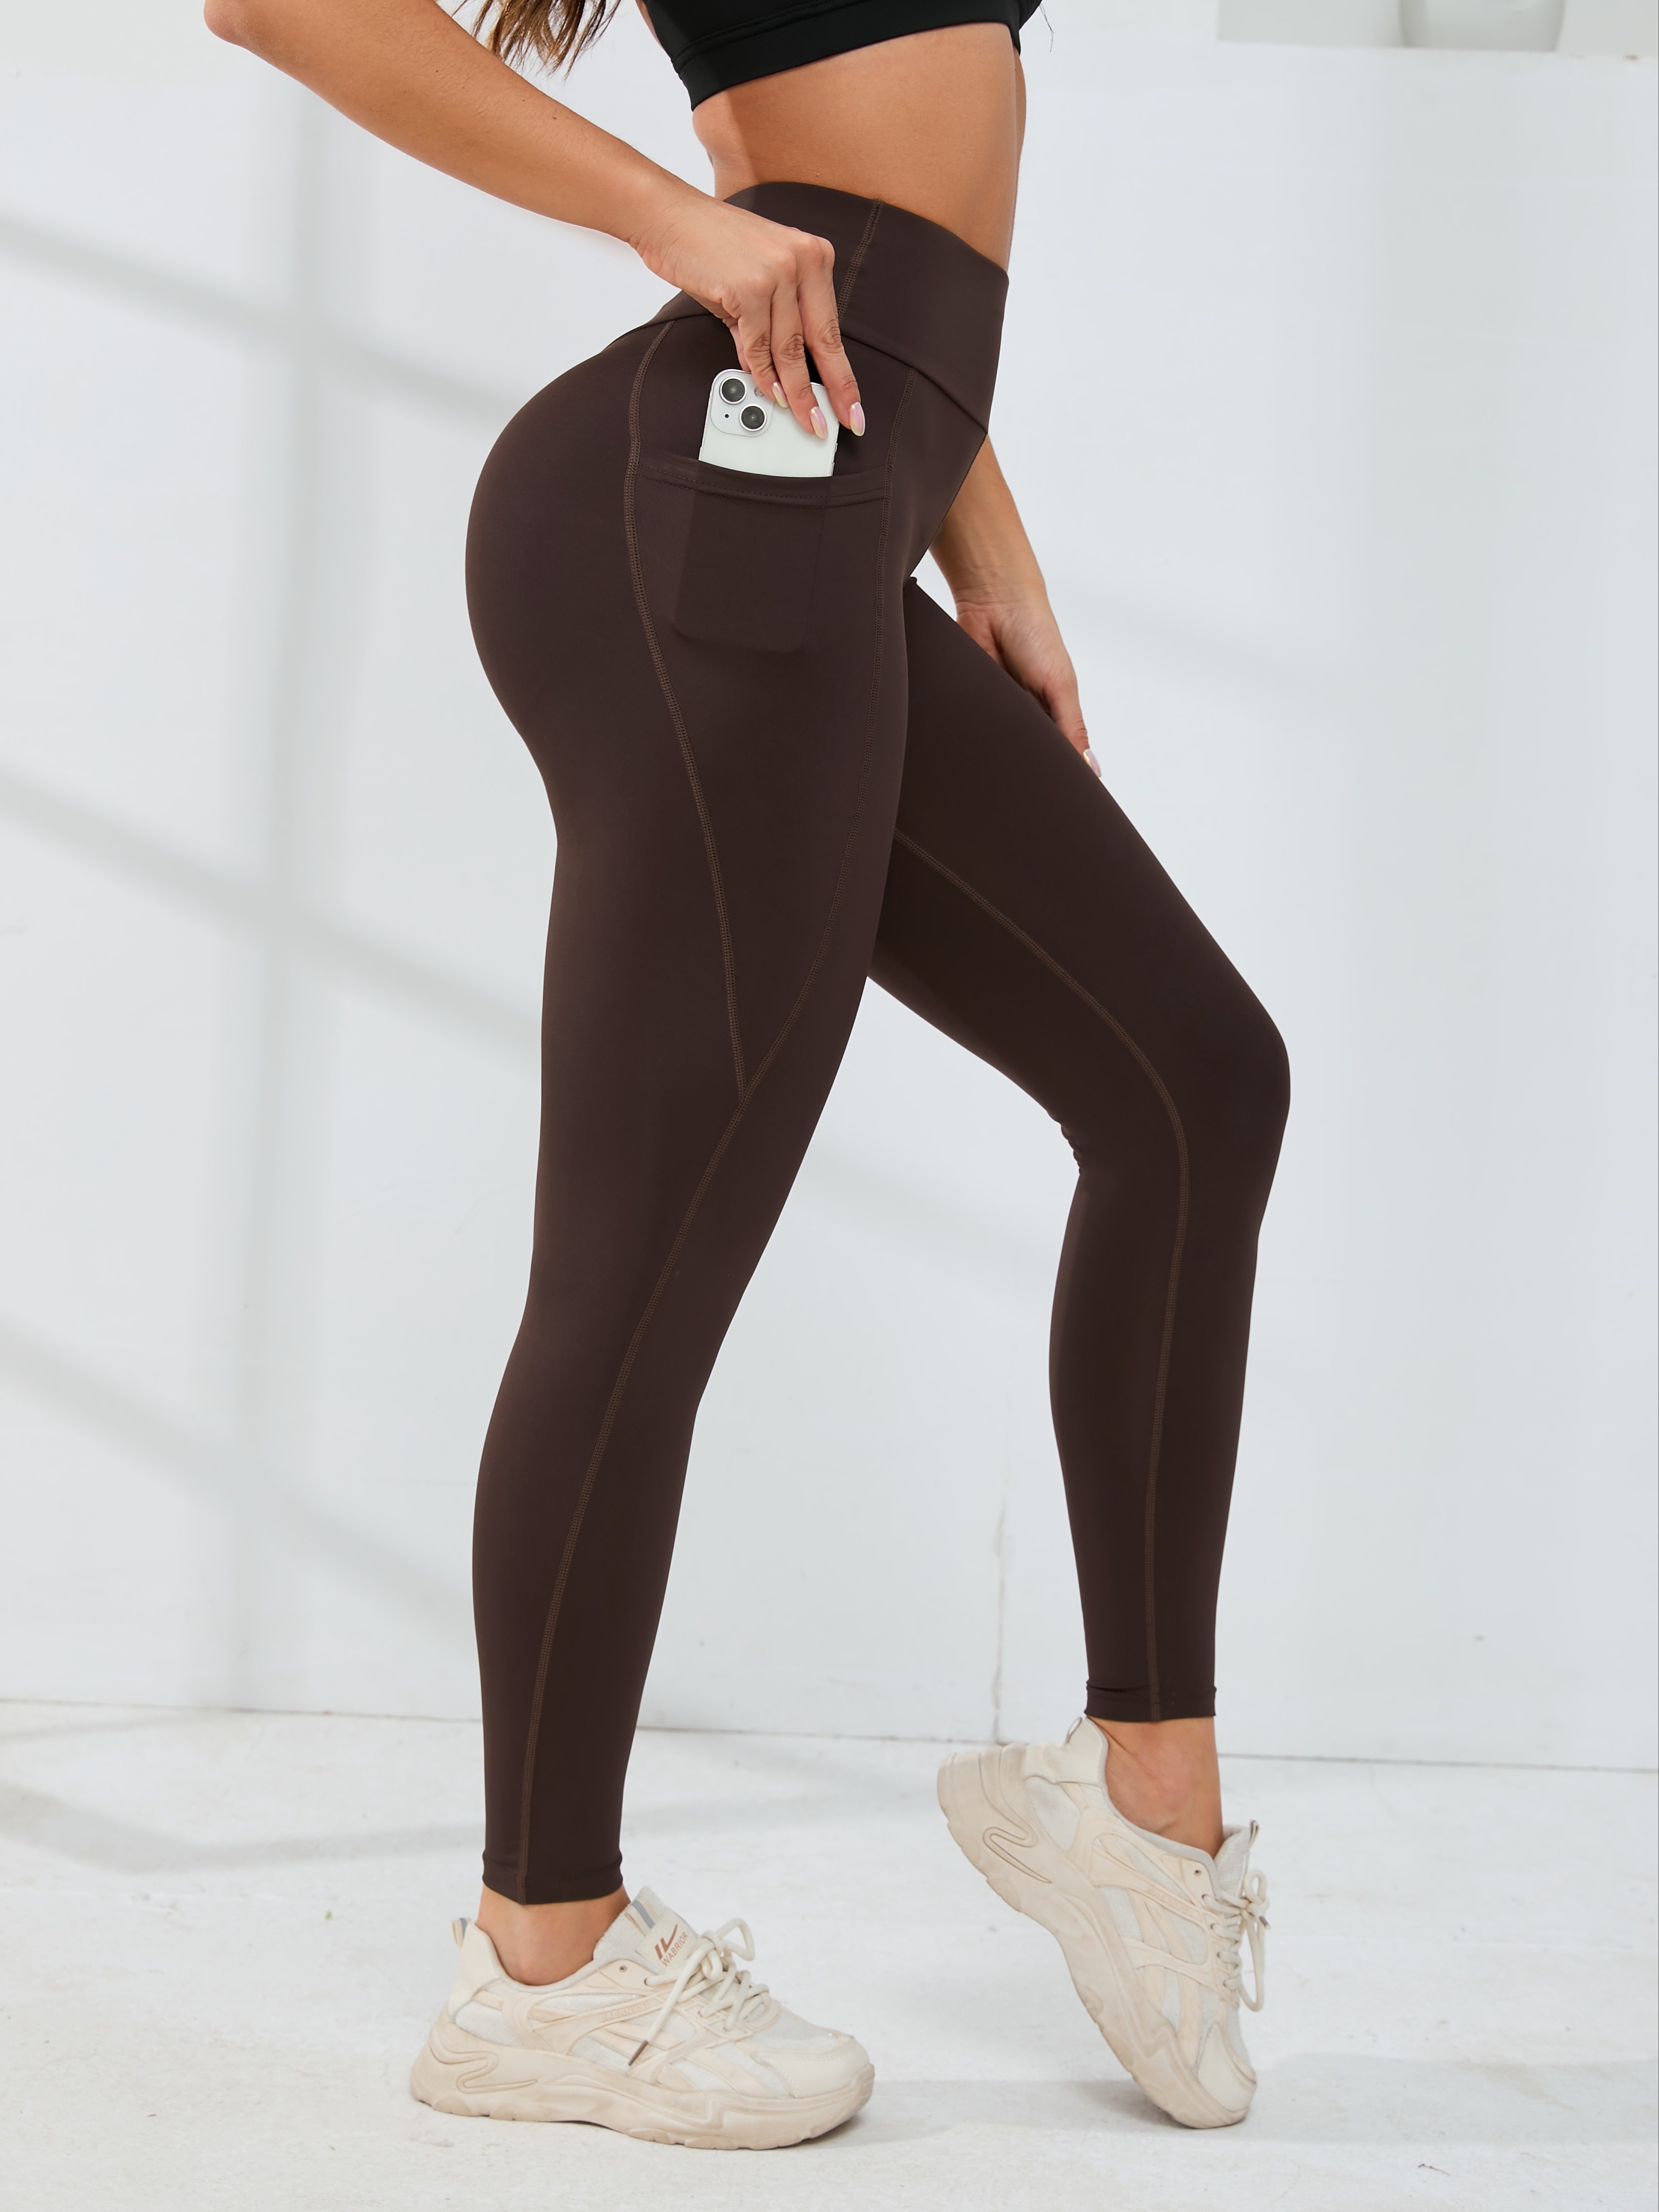 Lucy Activewear Brown Yoga Pants  Lucy activewear, Yoga pants with  pockets, Yoga pants